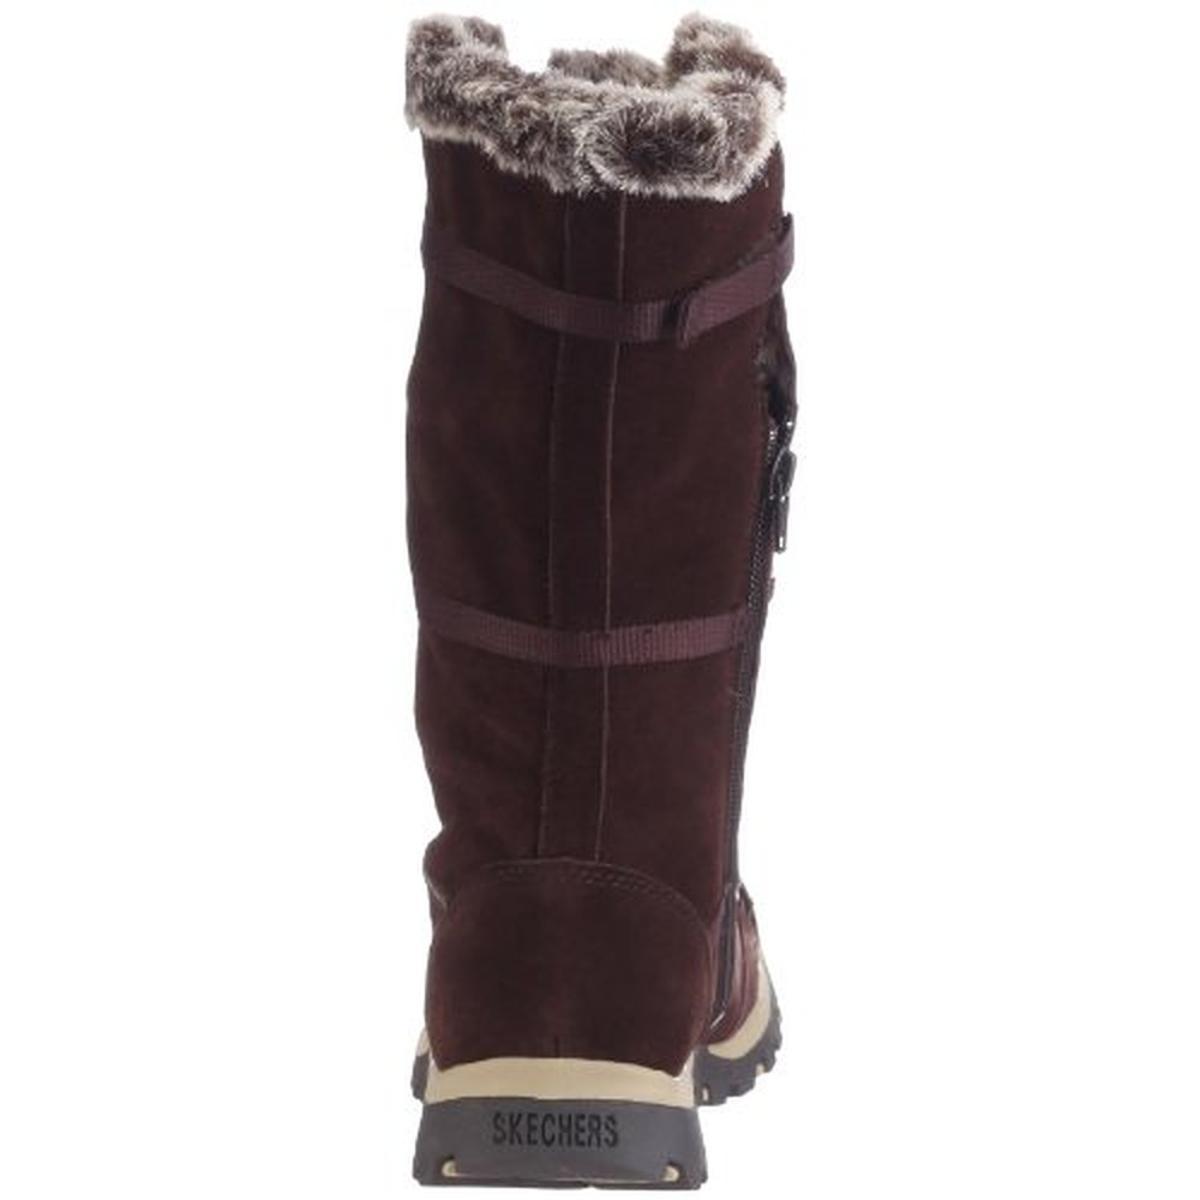 Skechers Grand Jams Unlimited Suede Faux Fur Winter Boots in Brown | Lyst